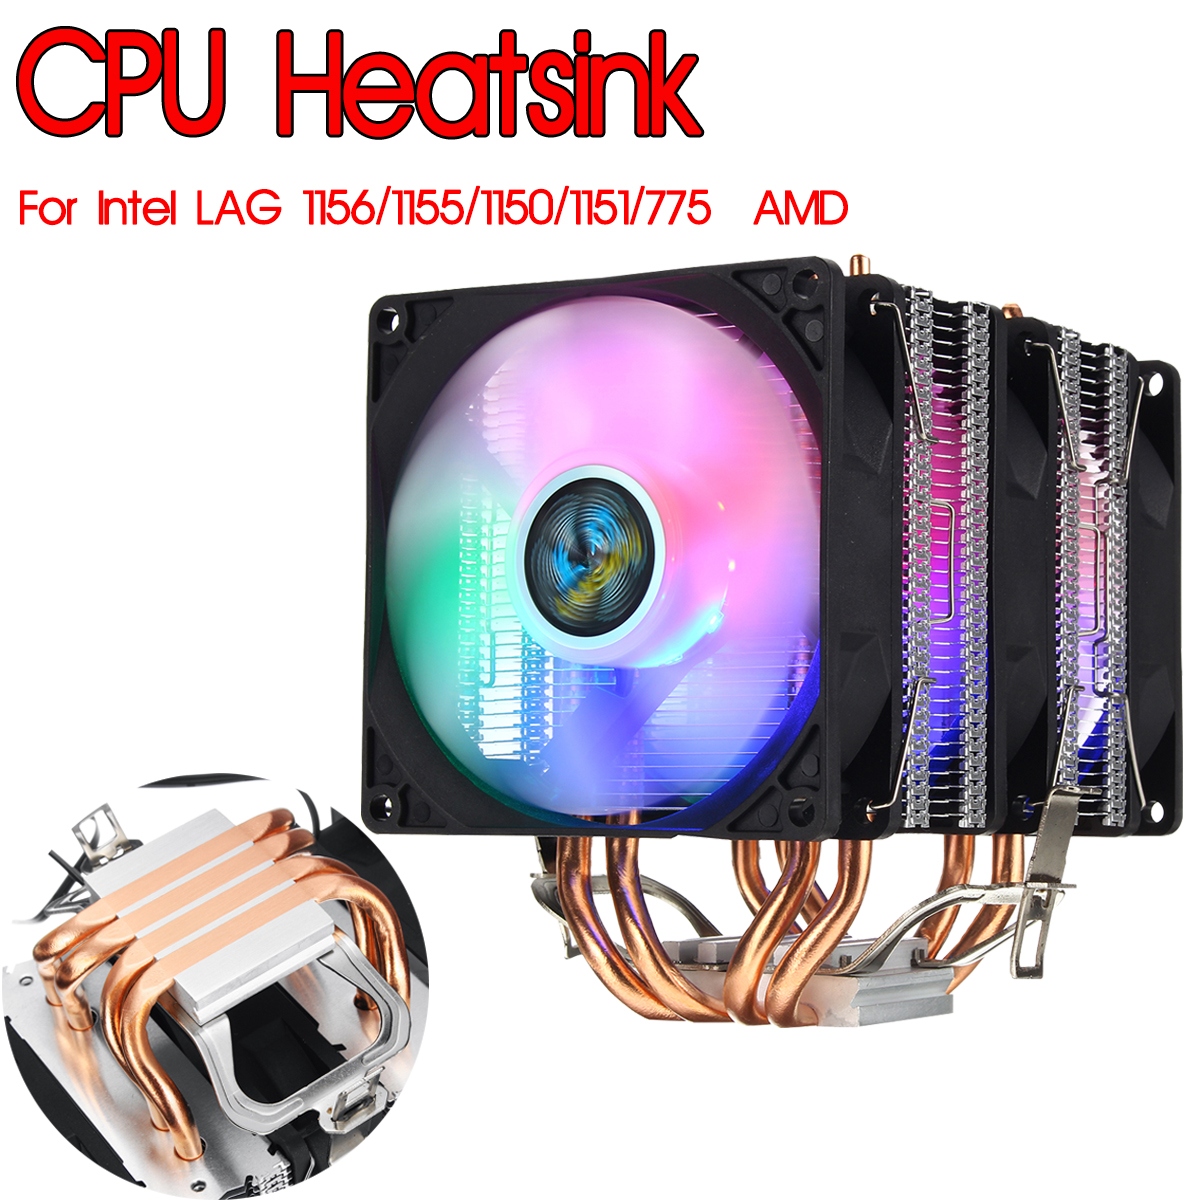 3 Pin Triple Fans Four Copper Heat Pipes Colorful LED Light CPU Cooling Fan Cooler Heatsink for Intel AMD 8